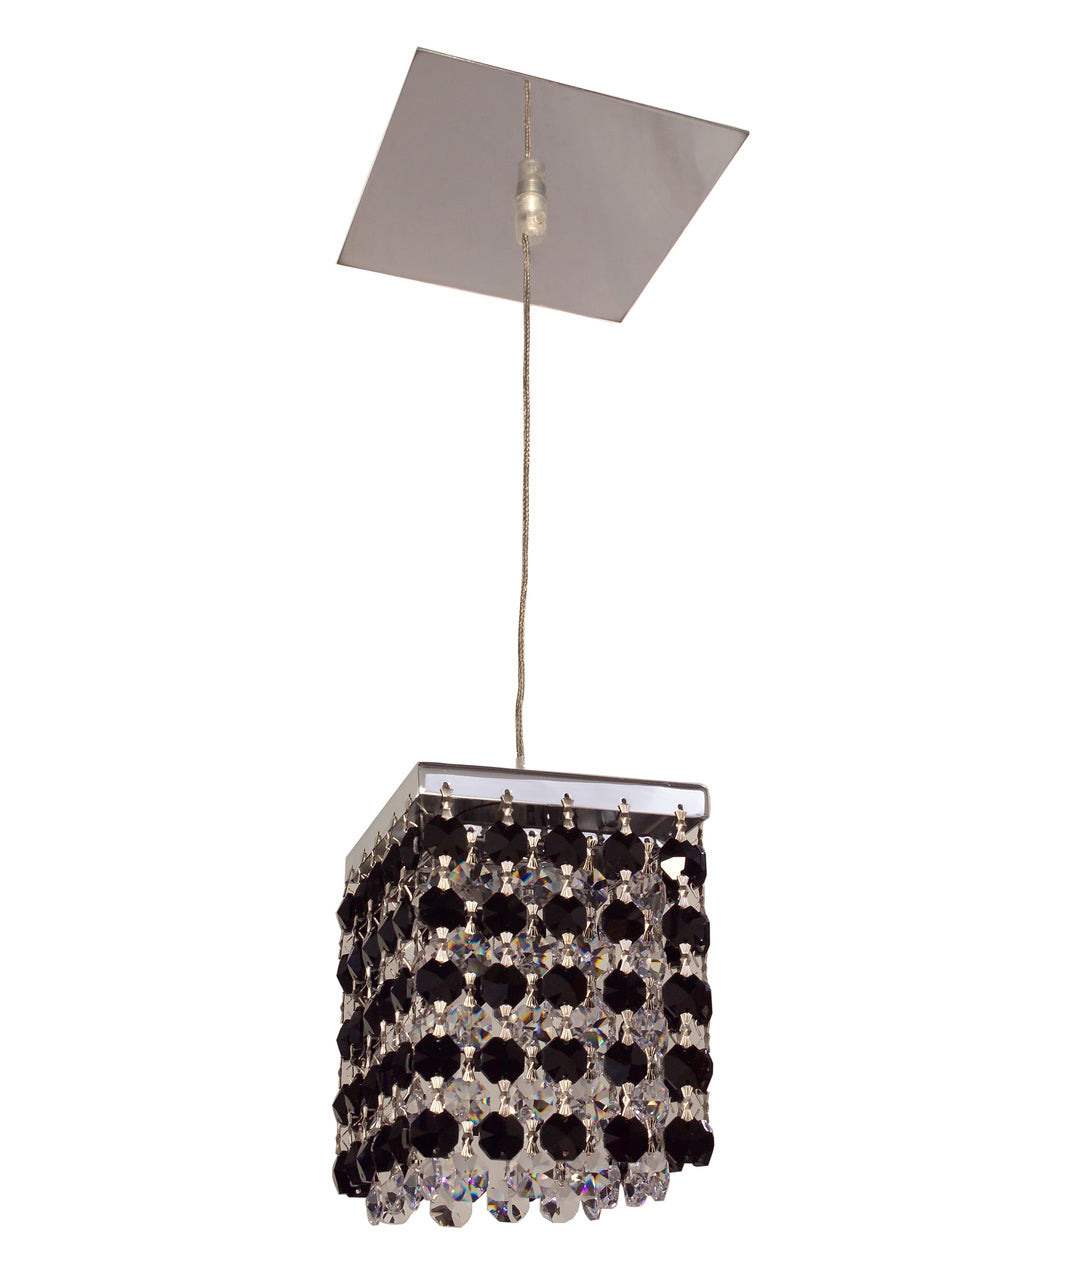 Classic Lighting 16101 BLK-CP Bedazzle Crystal Pendant in Chrome